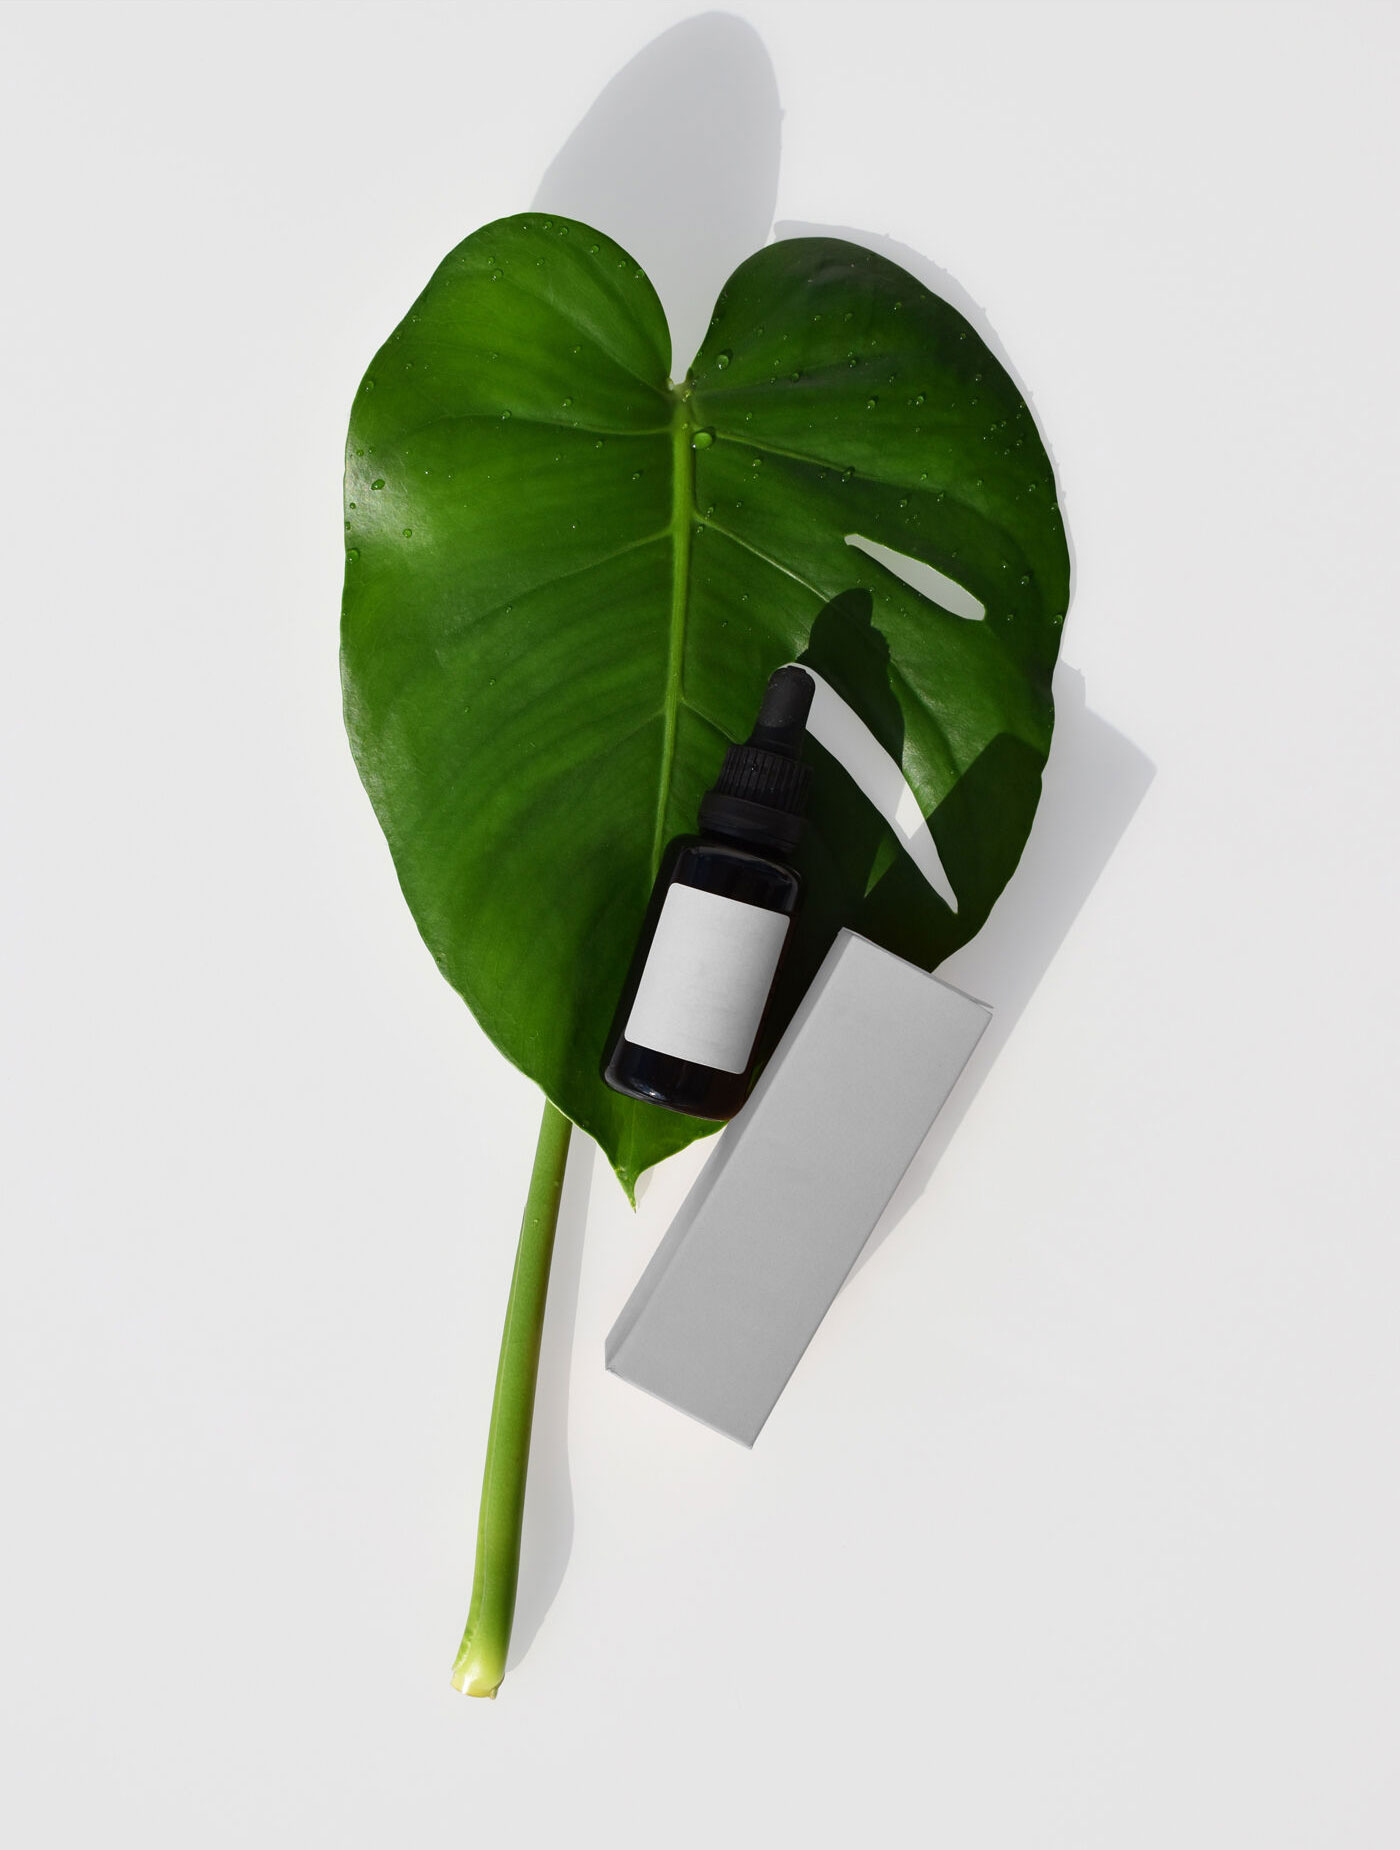 Plastic Essential Oil on a Leaf Mockup Top View FREE PSD